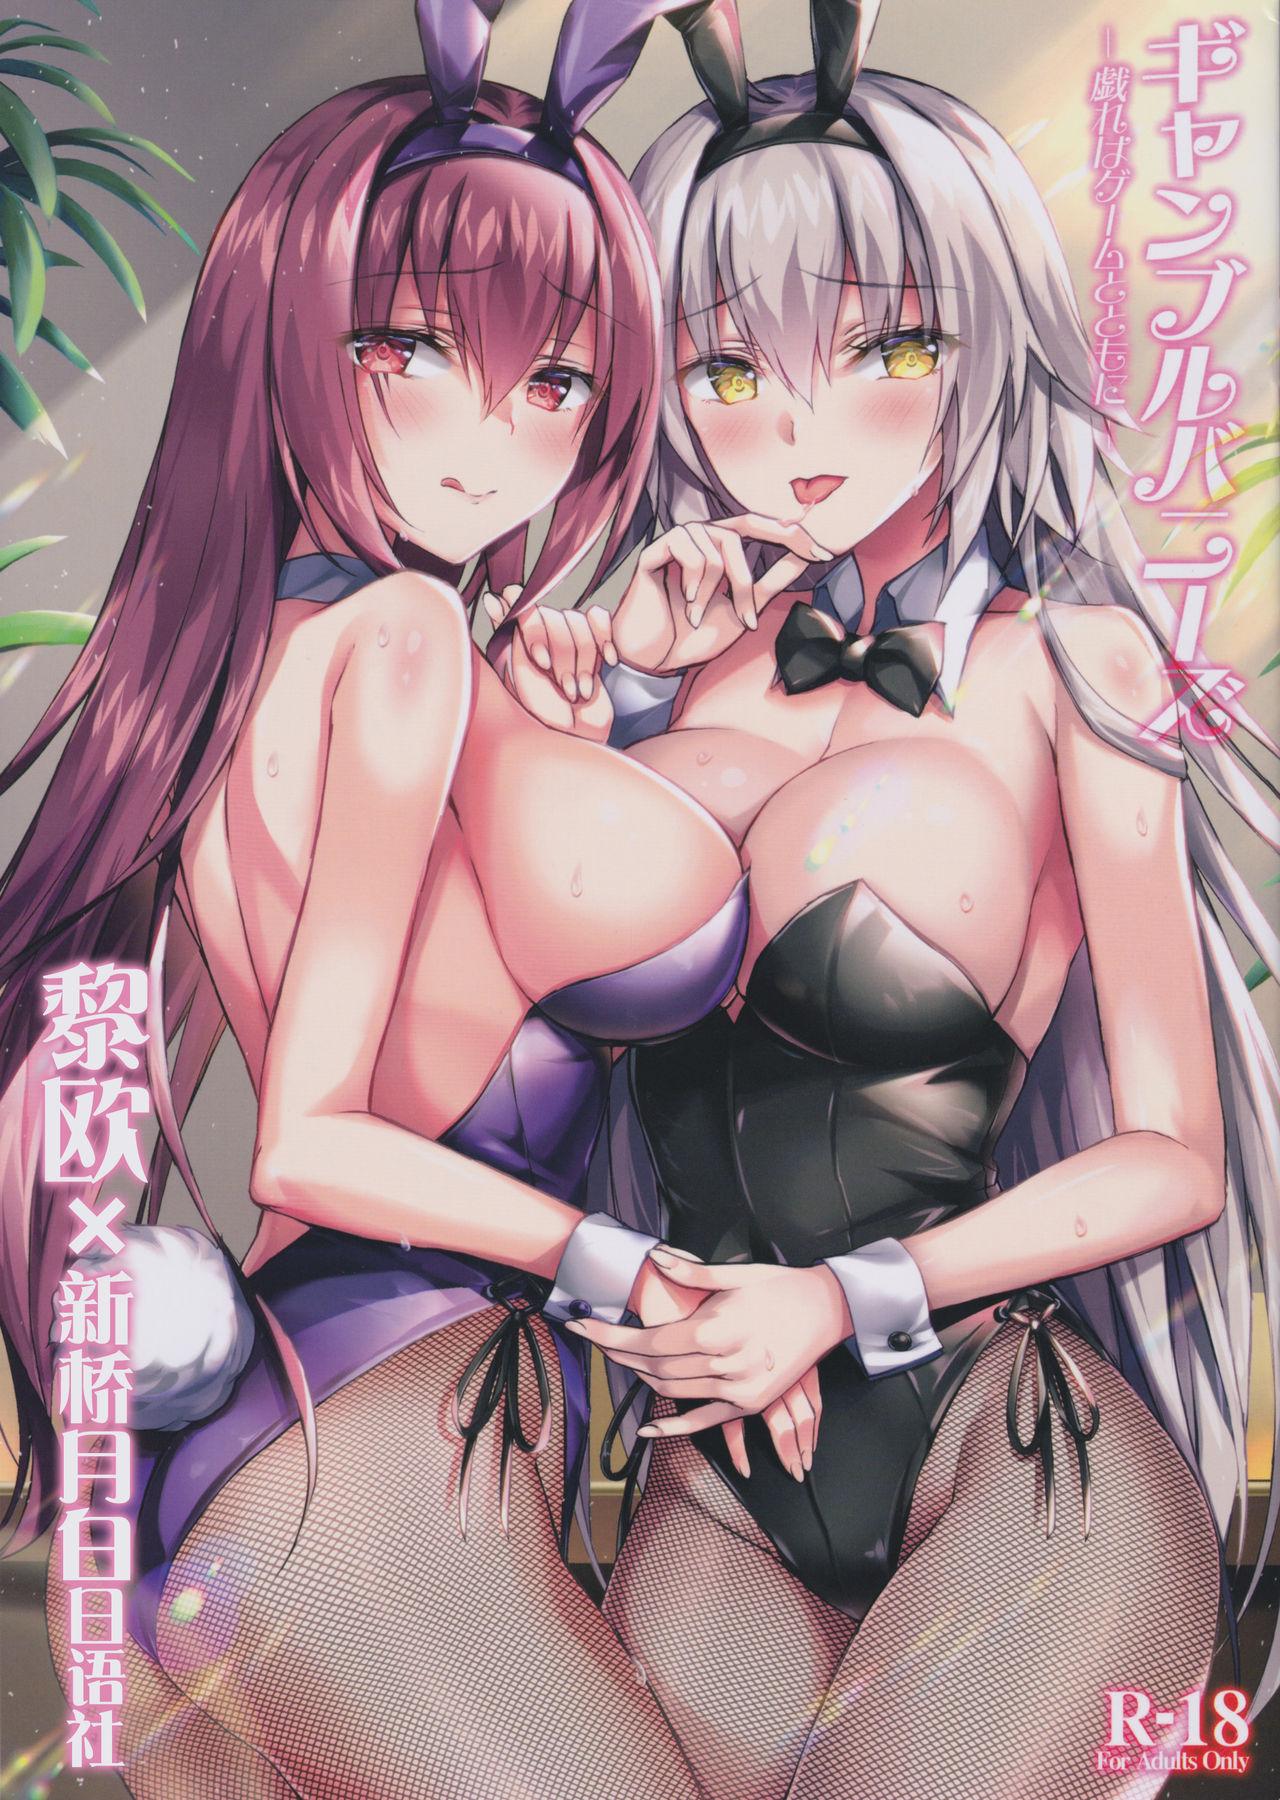 Cheating Gamble Bunnys - Fate grand order Jap - Picture 1